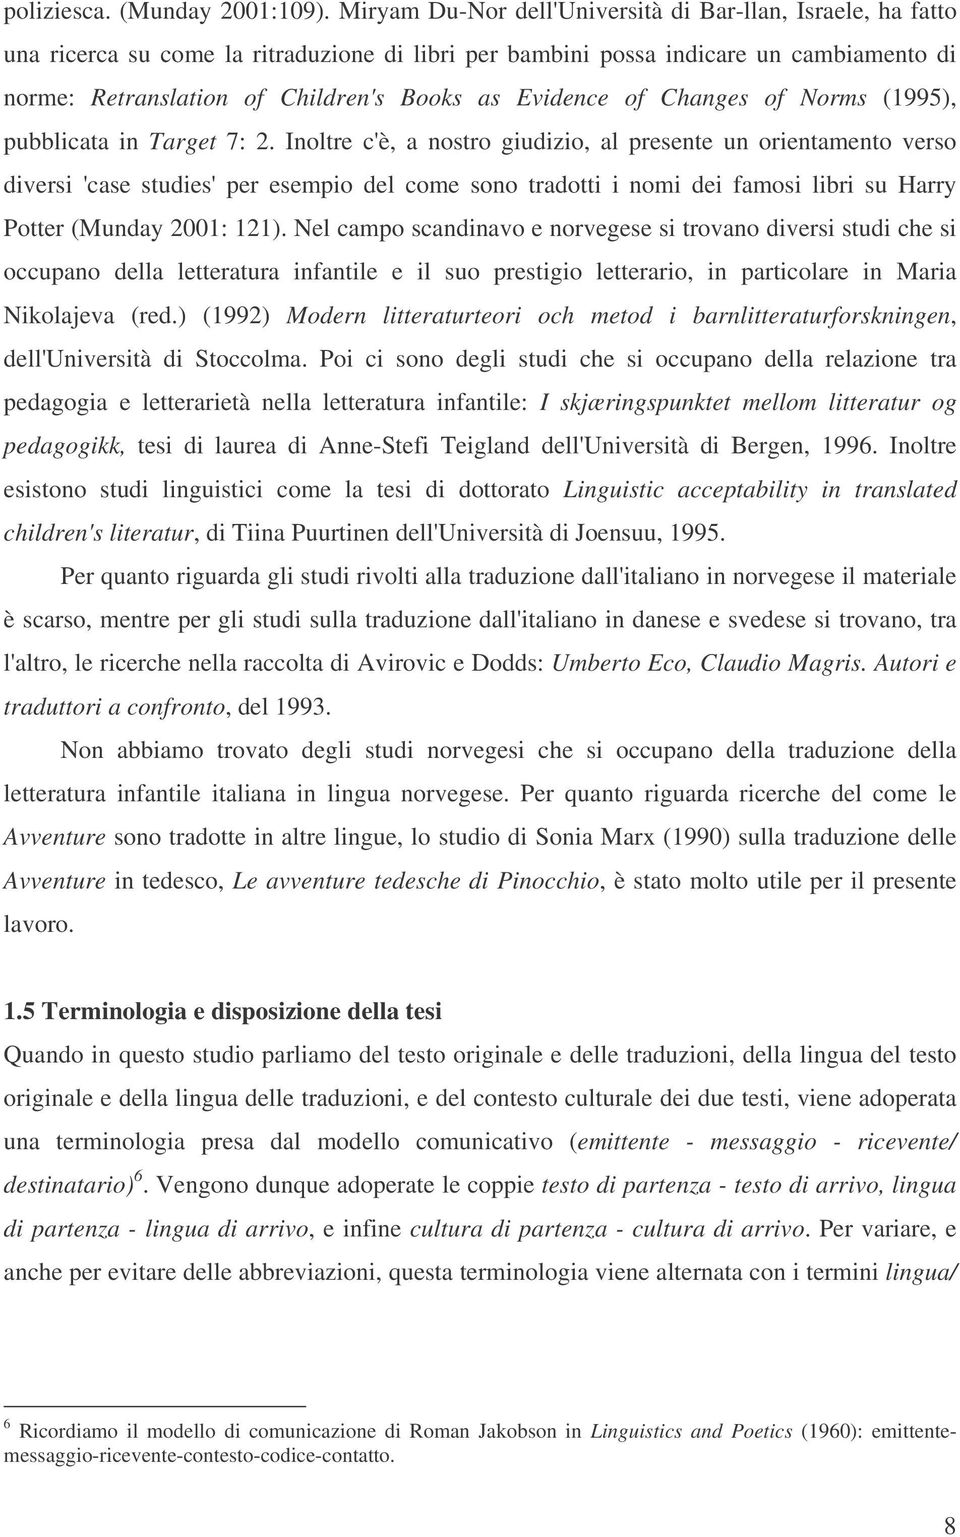 Evidence of Changes of Norms (1995), pubblicata in Target 7: 2.